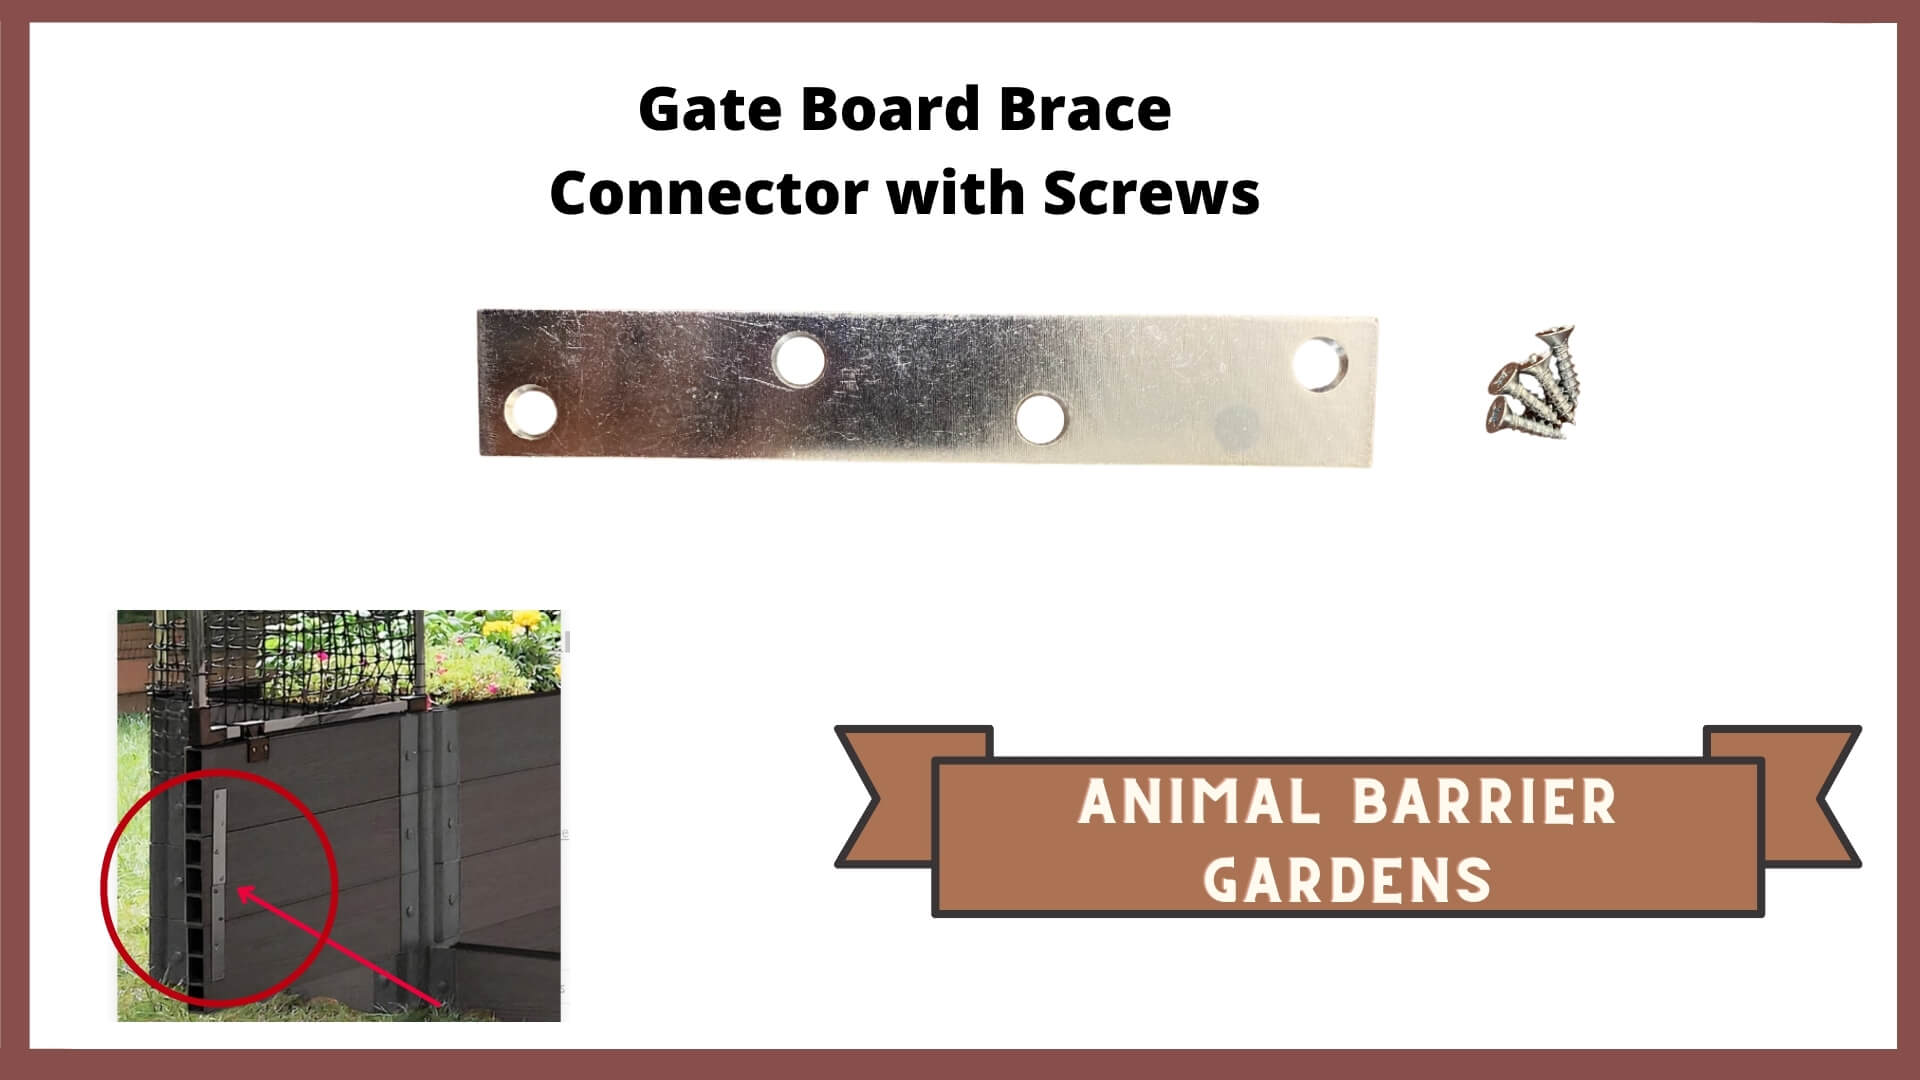 REPLACEMENT PARTS for: Stack & Extend Animal Barrier Kits & Gardens Accessories Frame It All Gate Board Brace Connector with Screws 